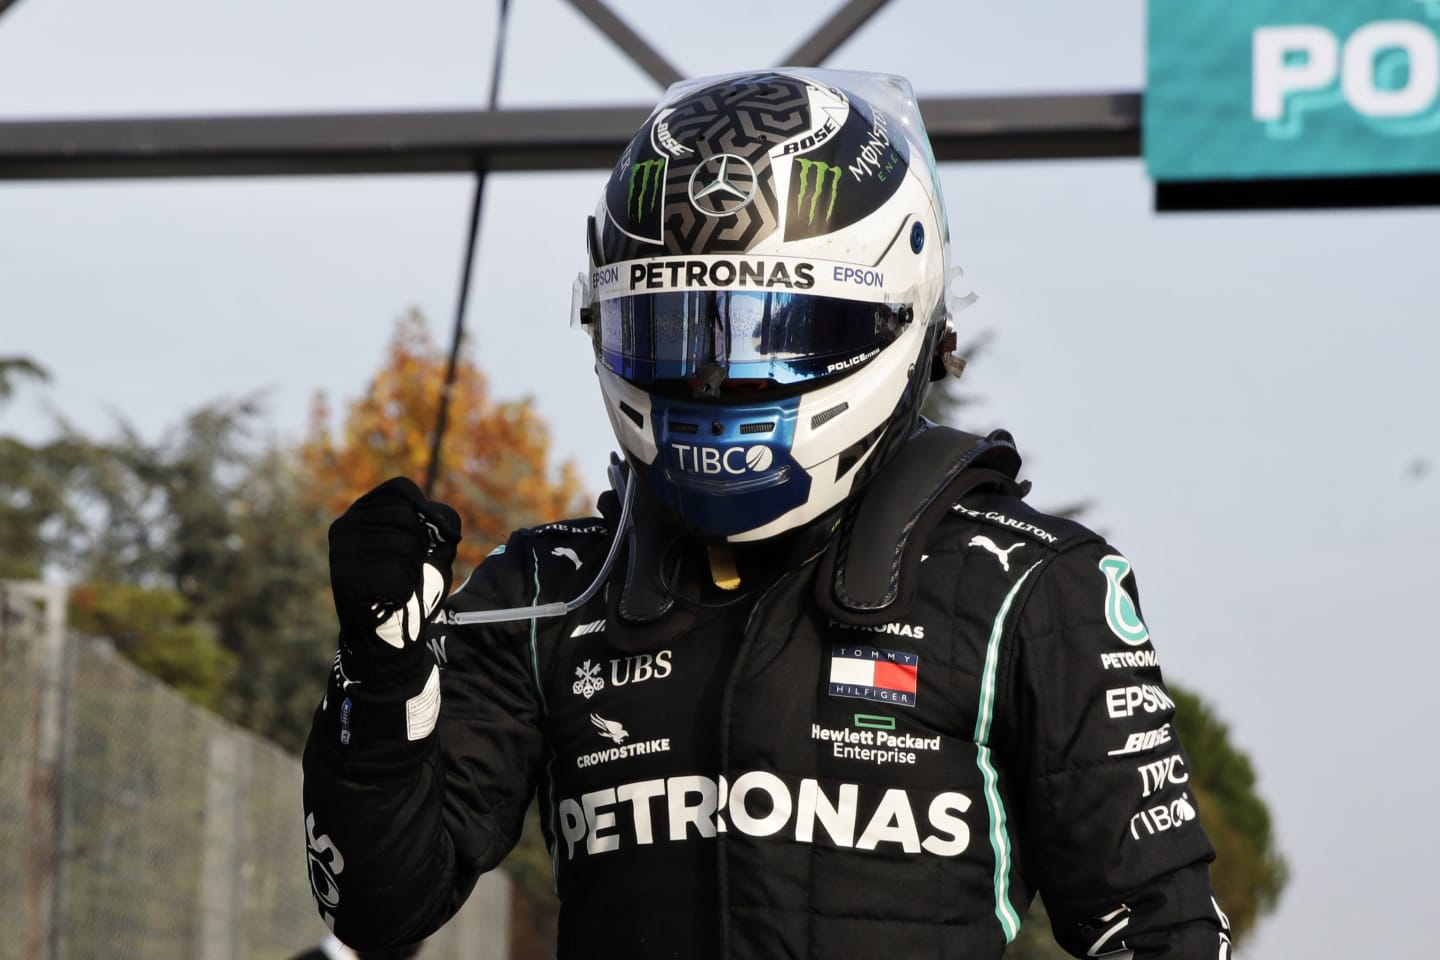 IMOLA, ITALY - OCTOBER 31: Pole position qualifier Valtteri Bottas of Finland and Mercedes GP climbs from his car in parc ferme during qualifying ahead of the F1 Grand Prix of Emilia Romagna at Autodromo Enzo e Dino Ferrari on October 31, 2020 in Imola, Italy. (Photo by Luca Bruno - Pool/Getty Images)